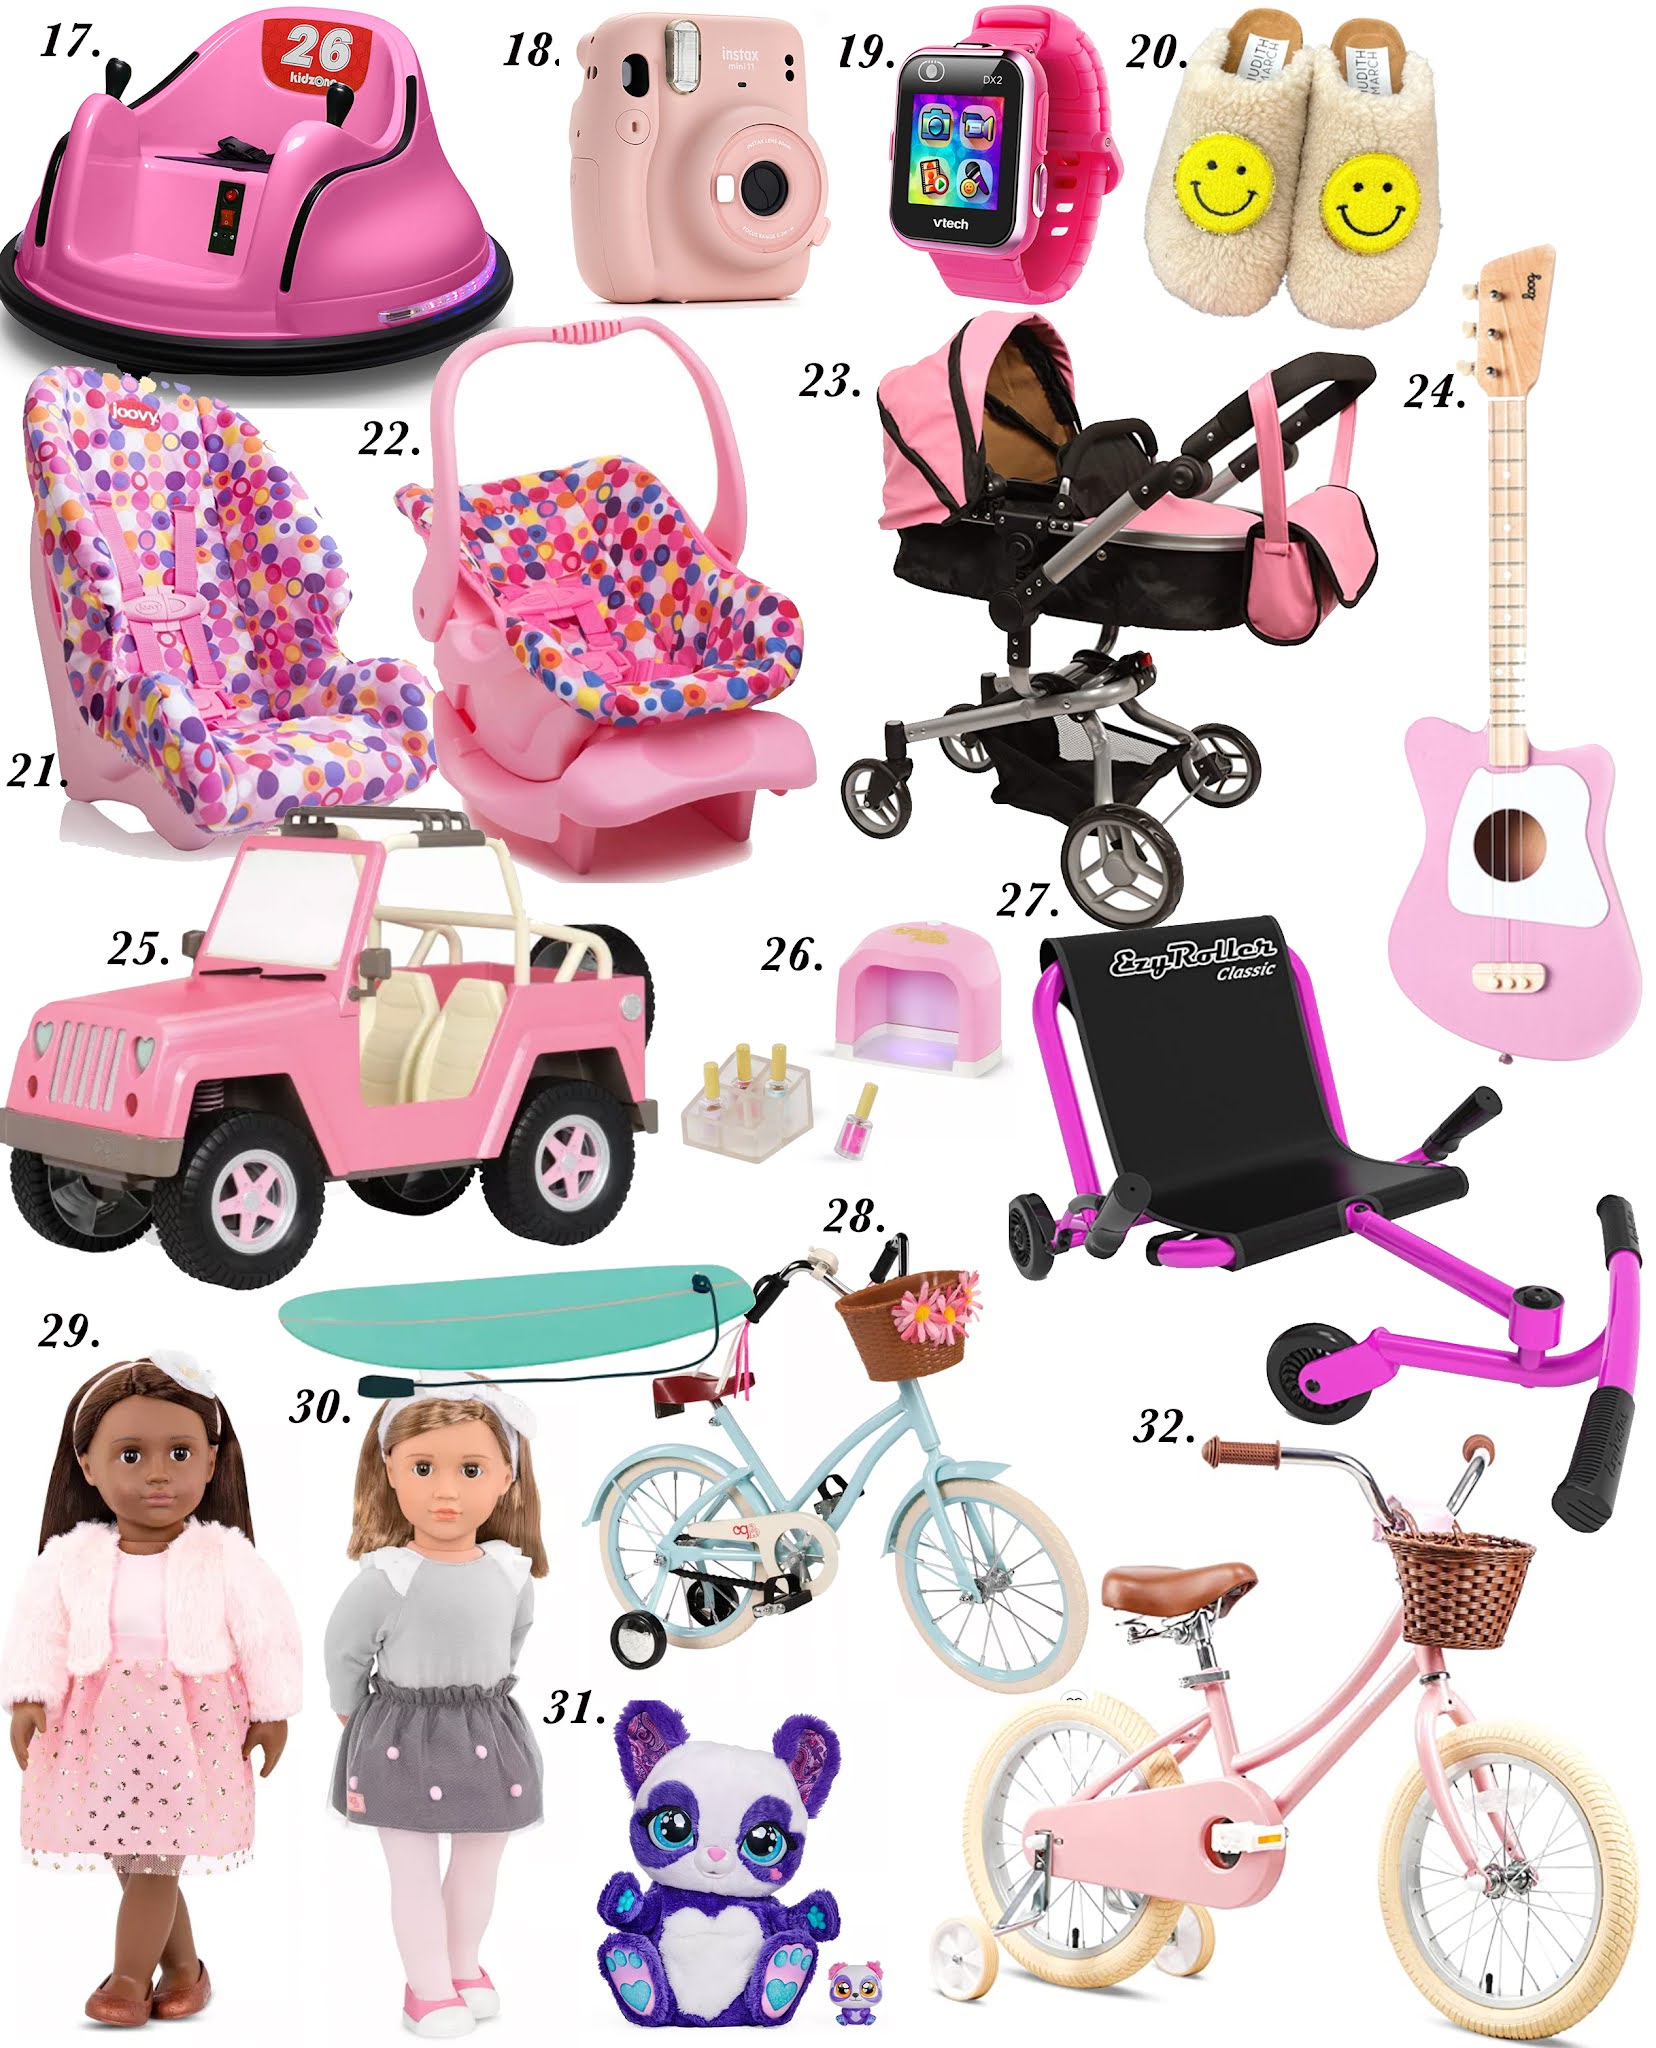 Gift Guides 2021: Gifts for Kids Boys & Girls of all ages - Something Delightful Blog #GiftsForKids #GiftIdeas